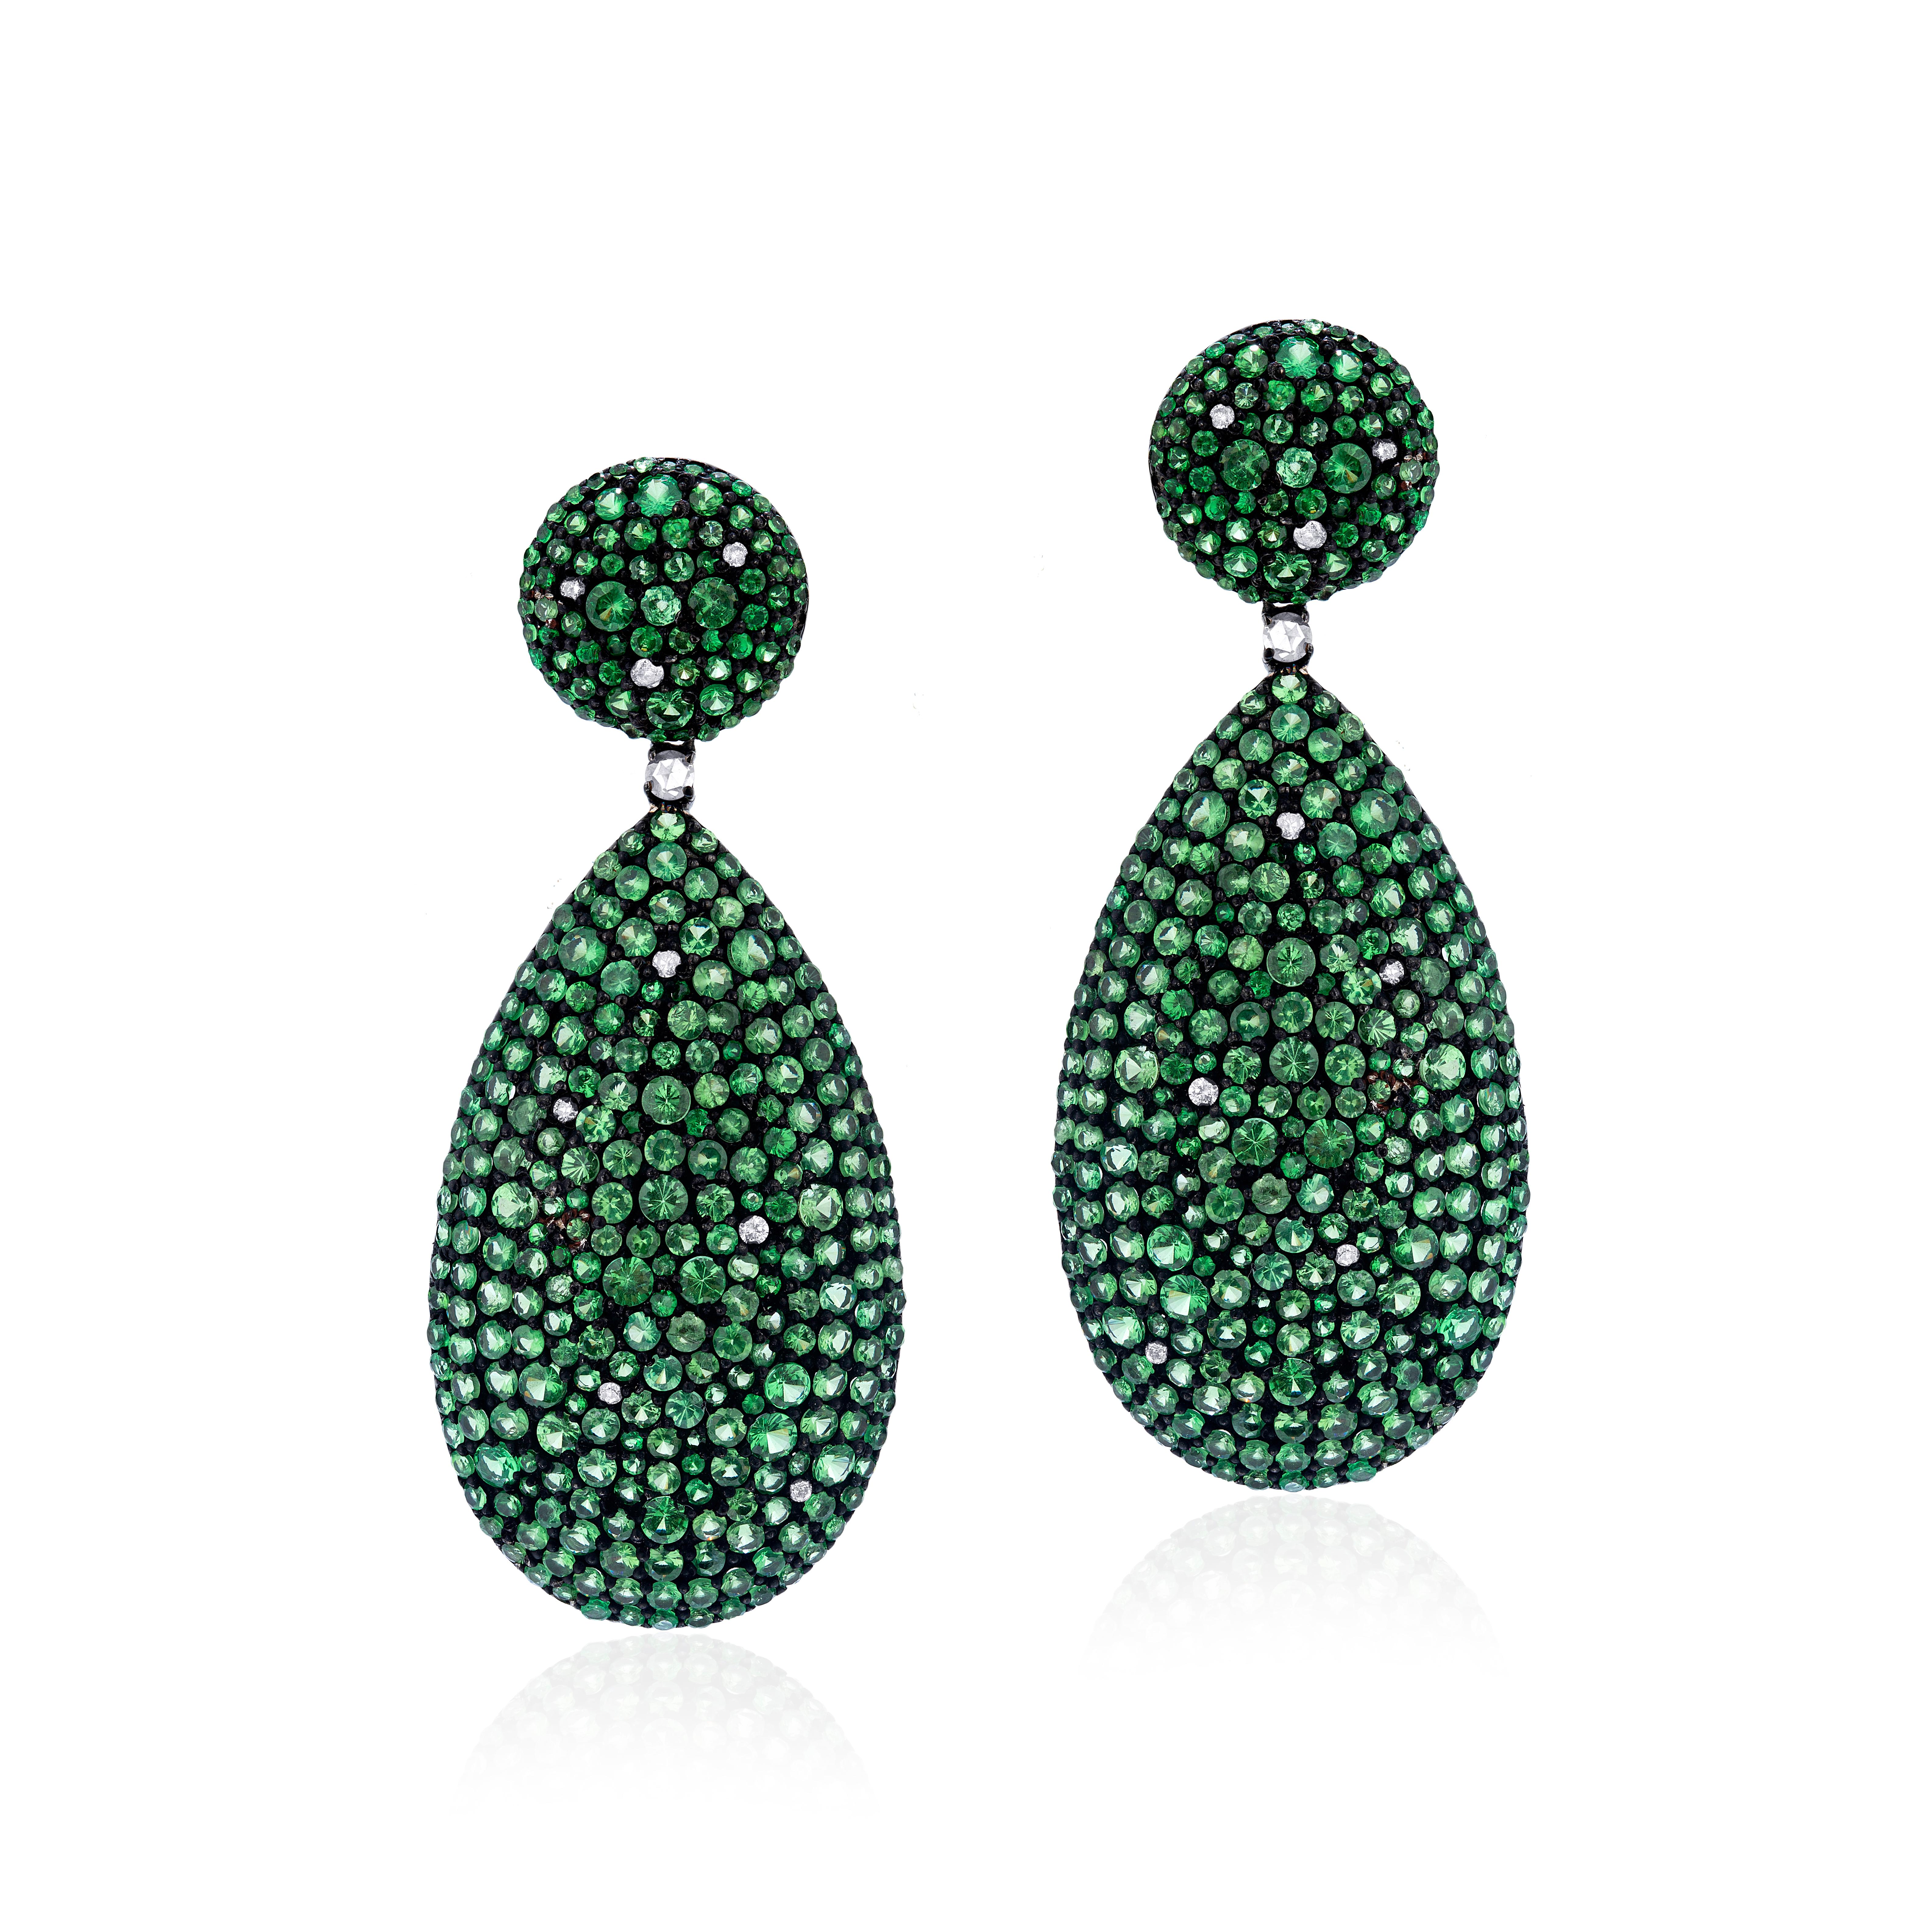 Gemistry Victorian 17.95cttw Tsavorite and Diamond Drop Earrings In New Condition For Sale In New York, NY